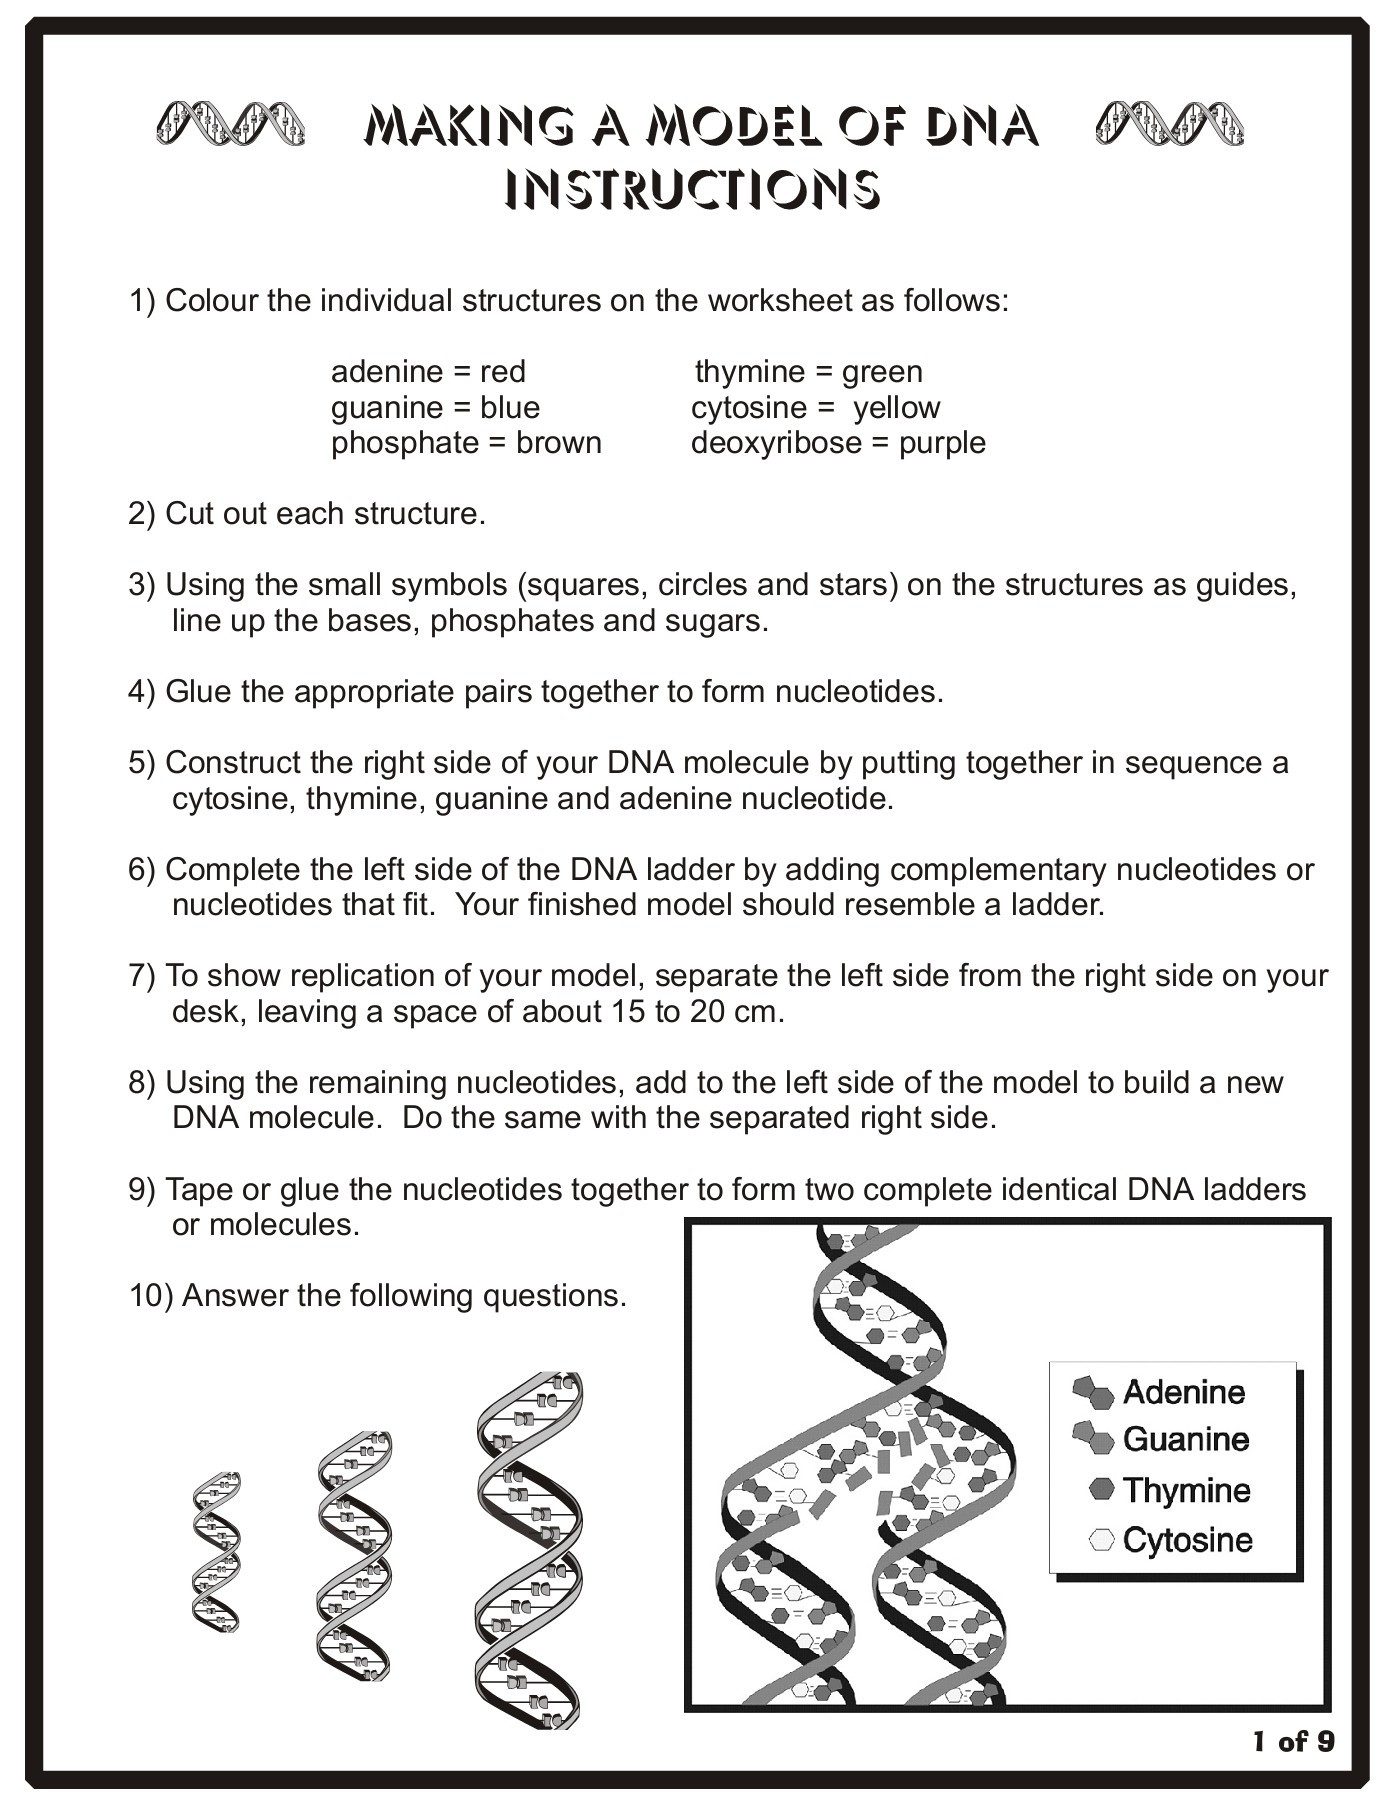 Dna Structure Worksheet Answer Making A Model Of Dna Instructions TriPod Pages 1 9